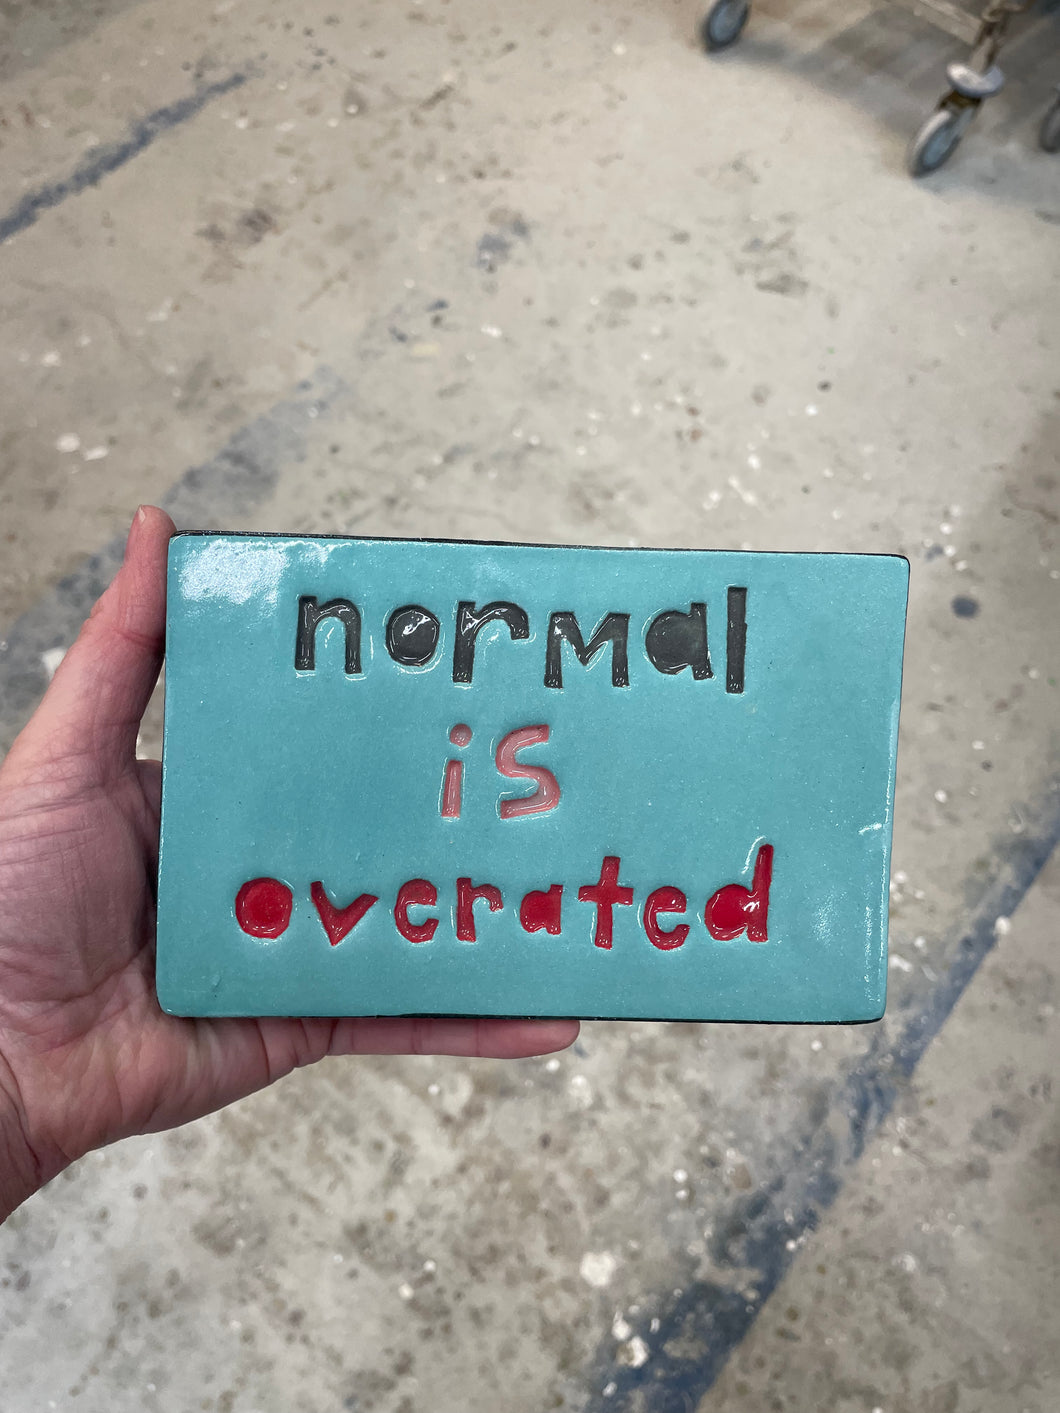 Normal is overrated tile.